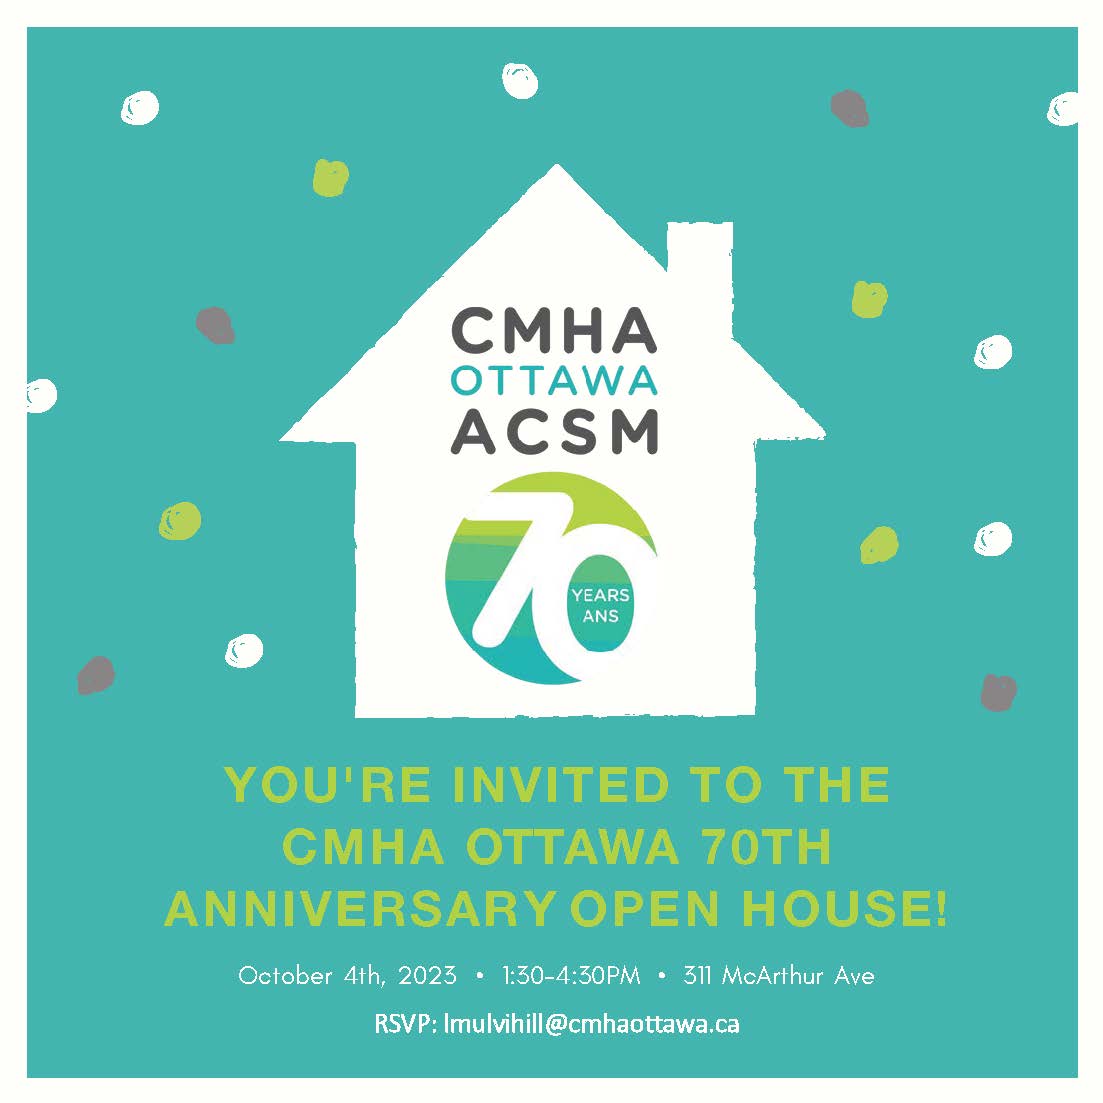 A graphic of a small, white house against a teal background with falling confetti. Text reads CMHA Ottawa ACSM 70.